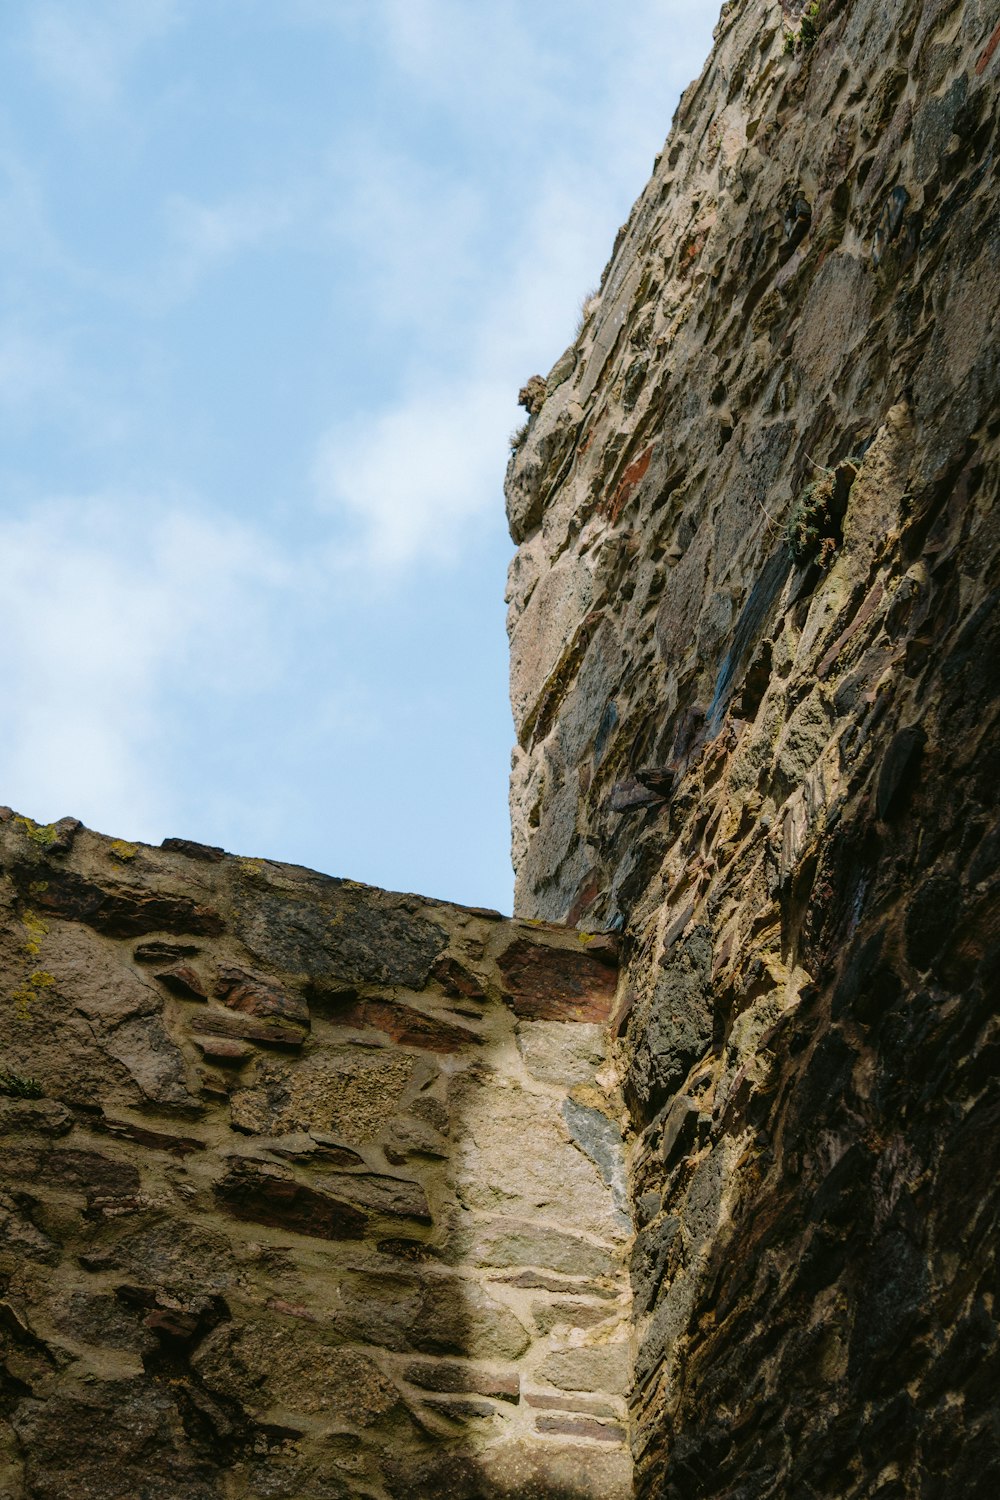 a bird is perched on the ledge of a stone building